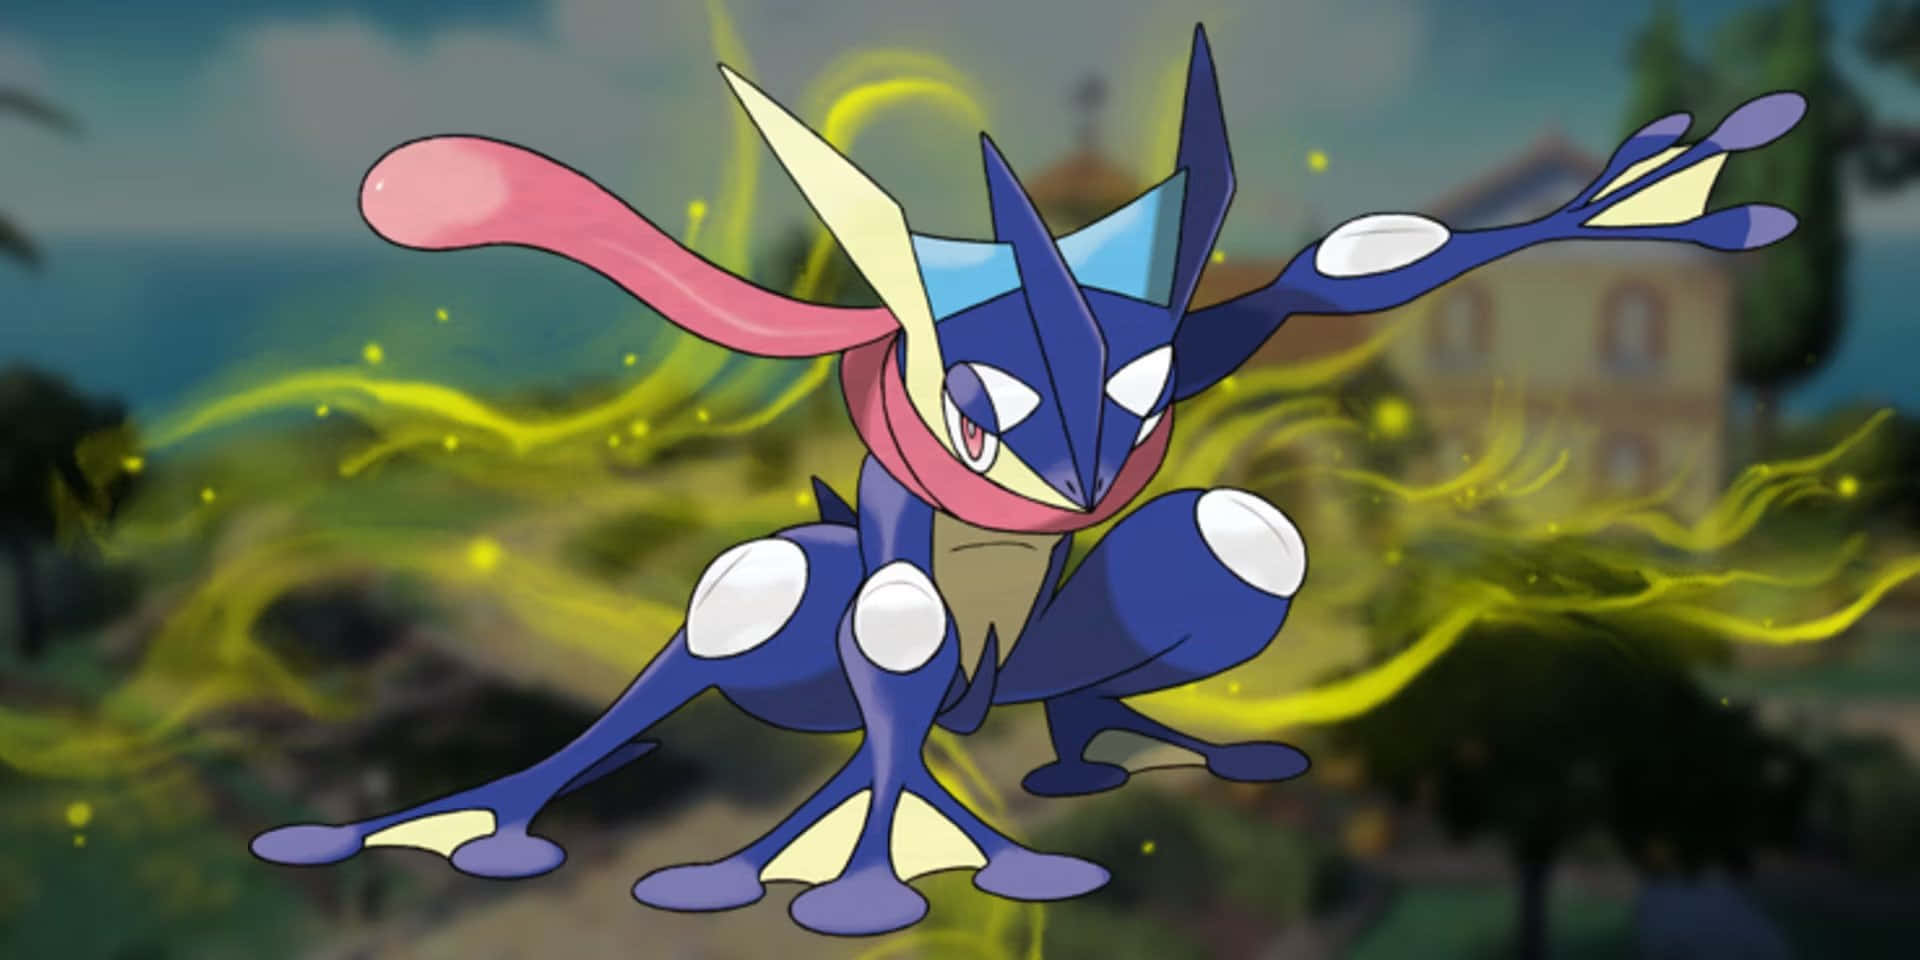 Greninja Strategy and Moves Guide for Pokemon Unite